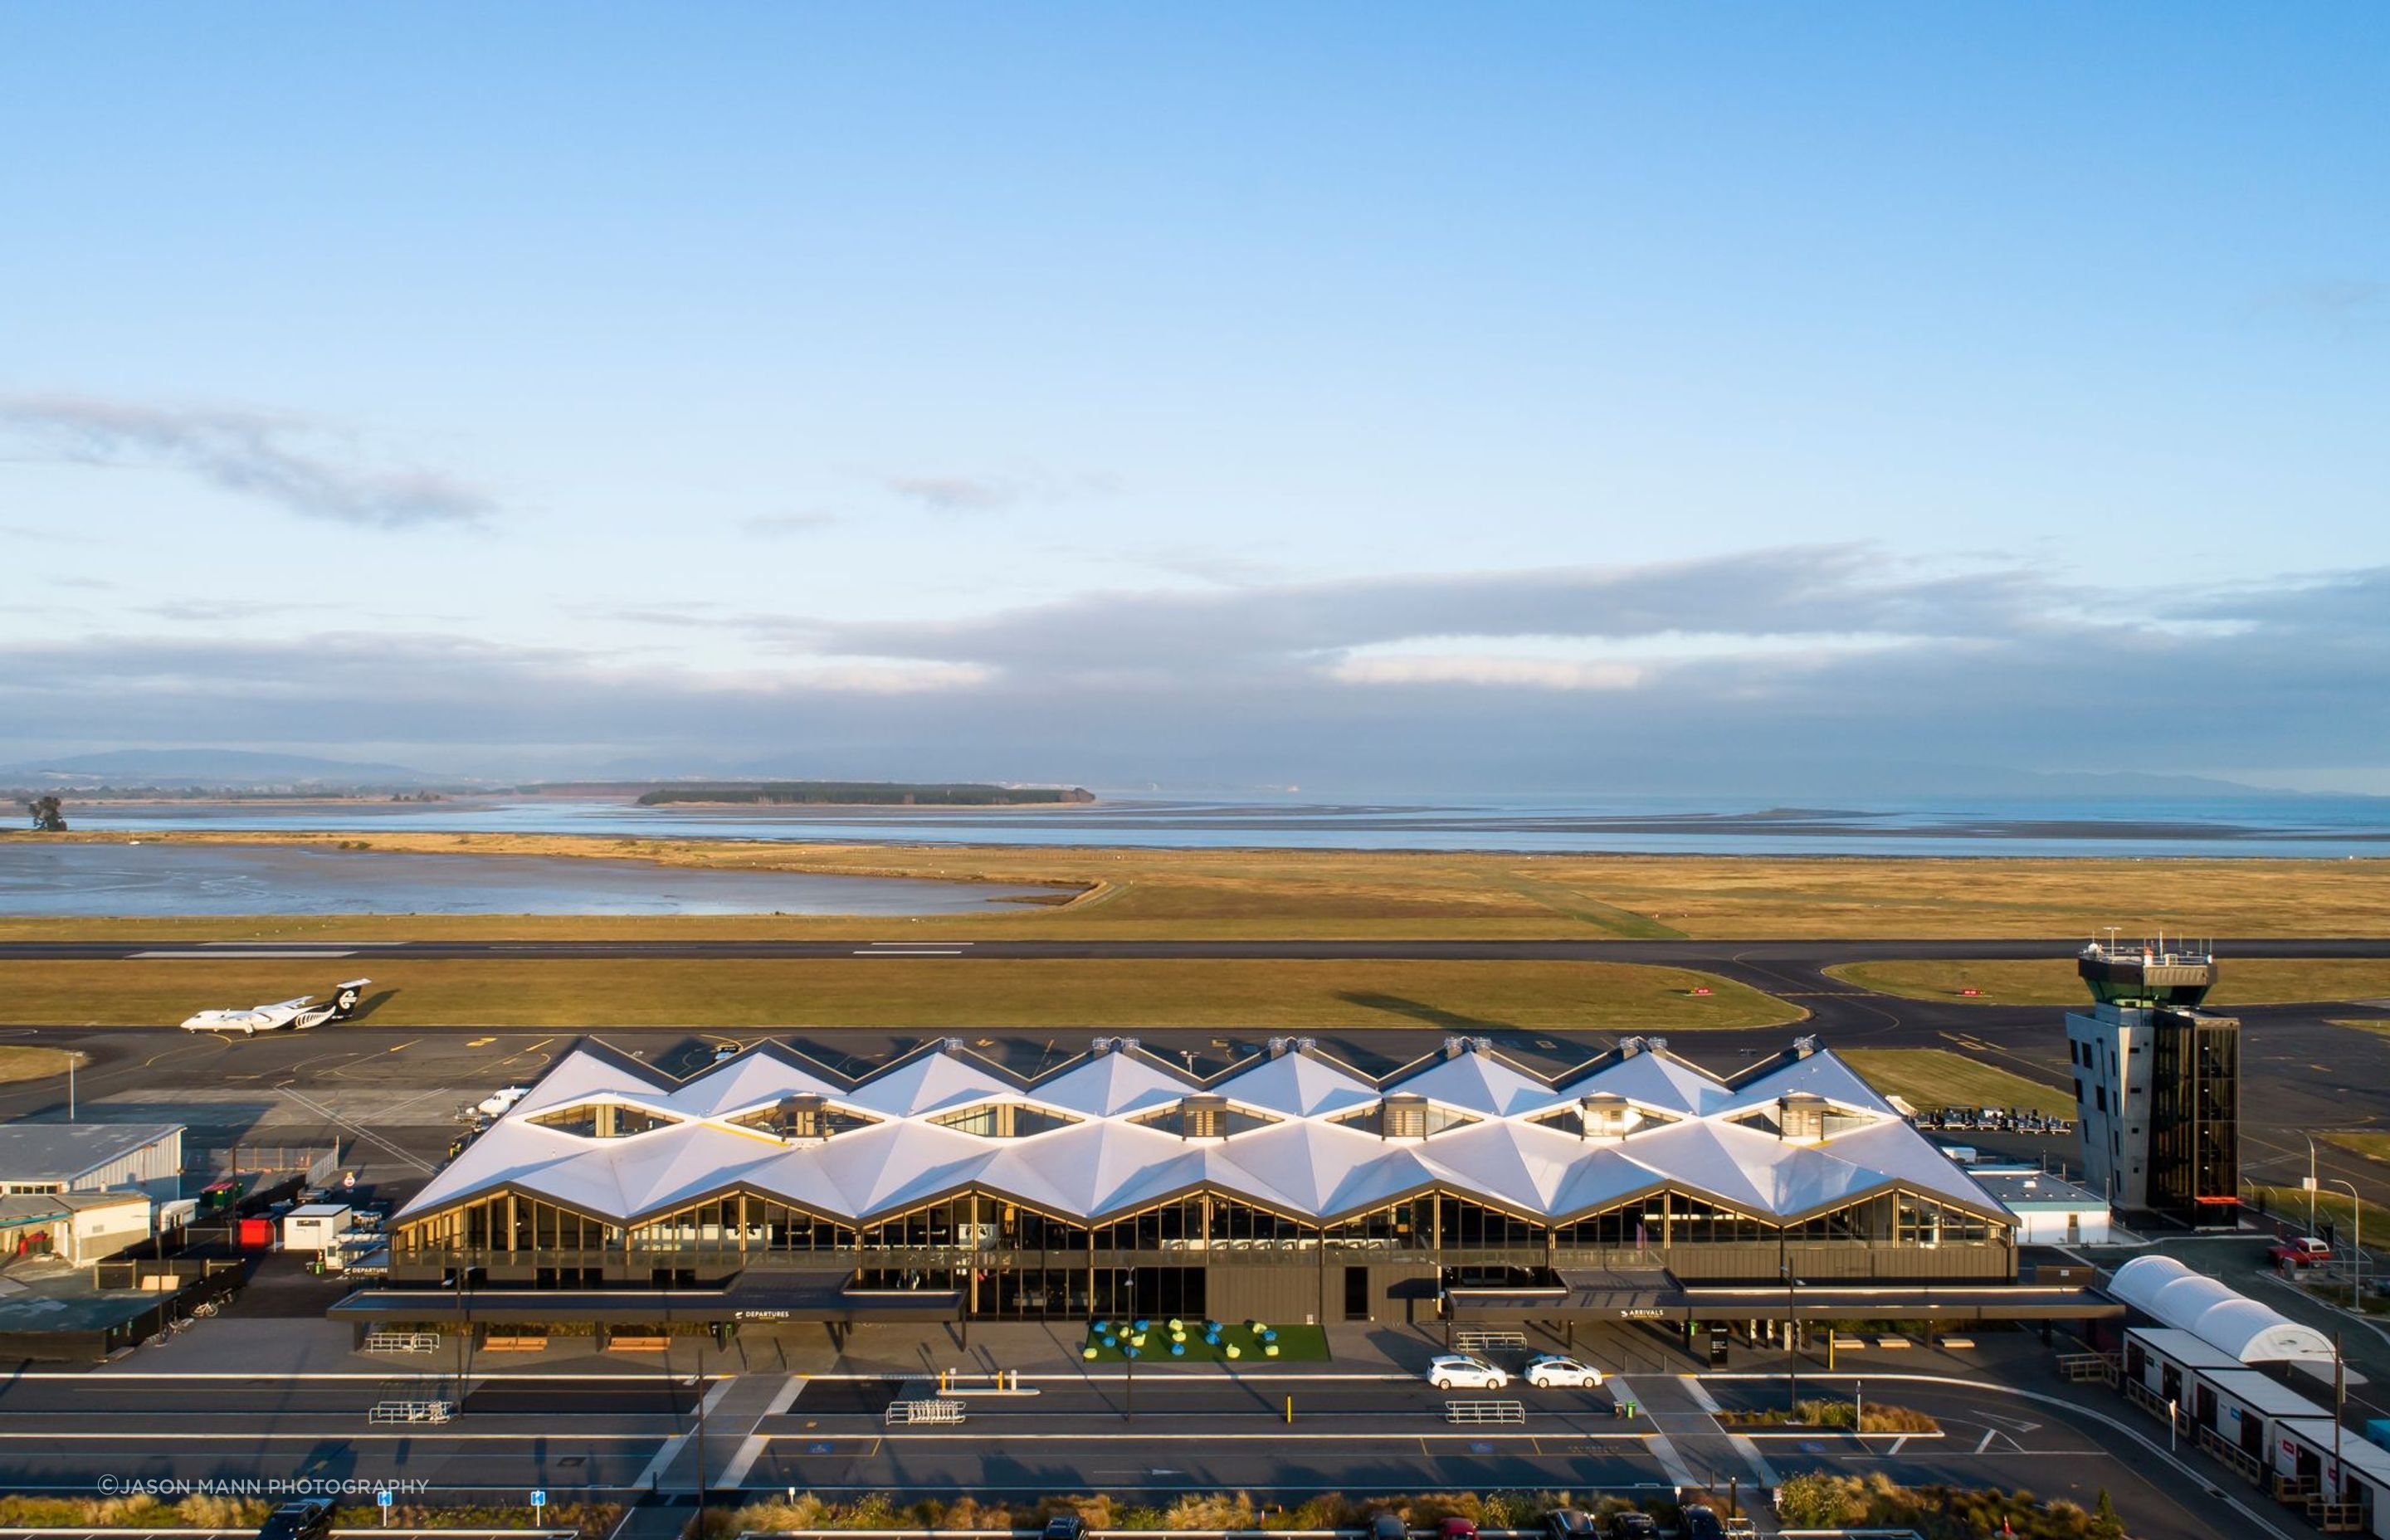 The airport's owners—Nelson Airport Limited—wanted a degree of modularity built into the design, which would easily enable the terminal to be further extended.